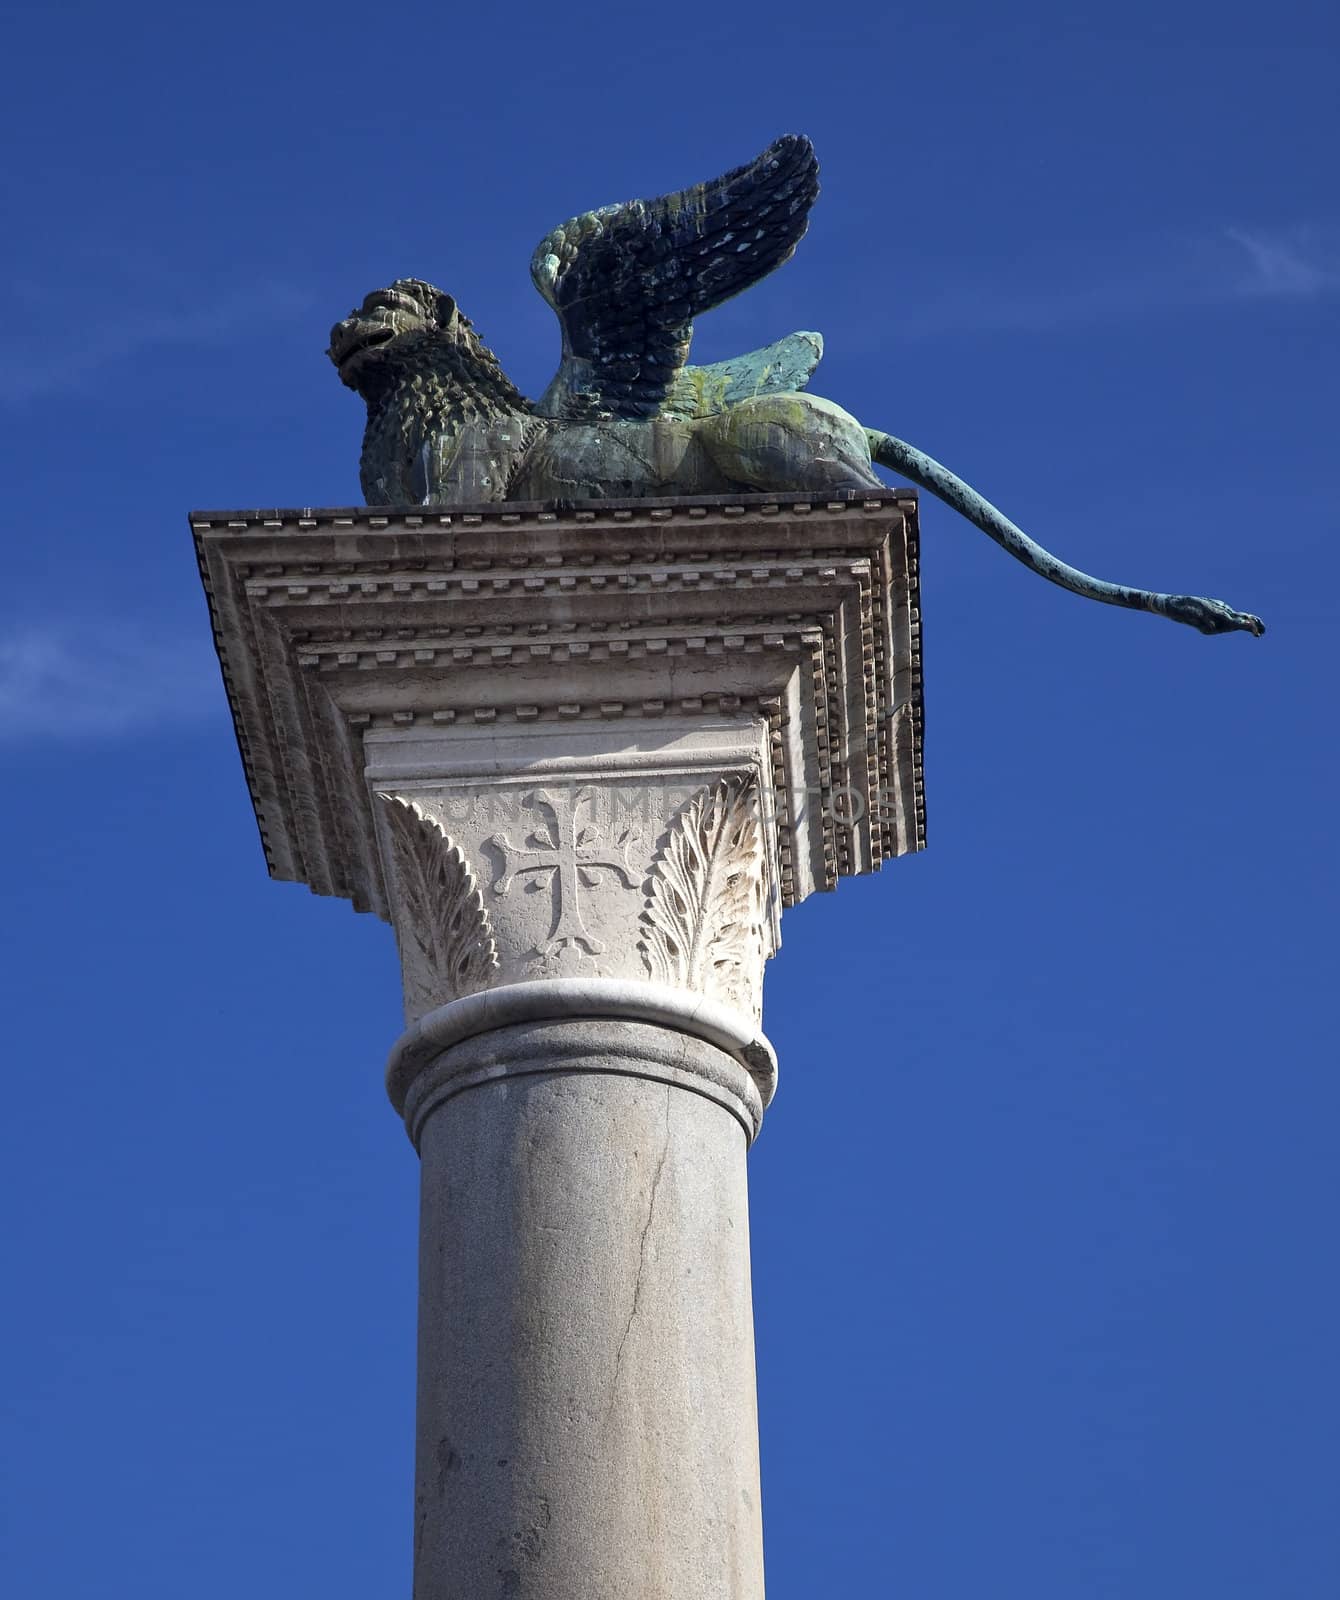 Saint Marks Winged Lion Column Venice Italy by bill_perry